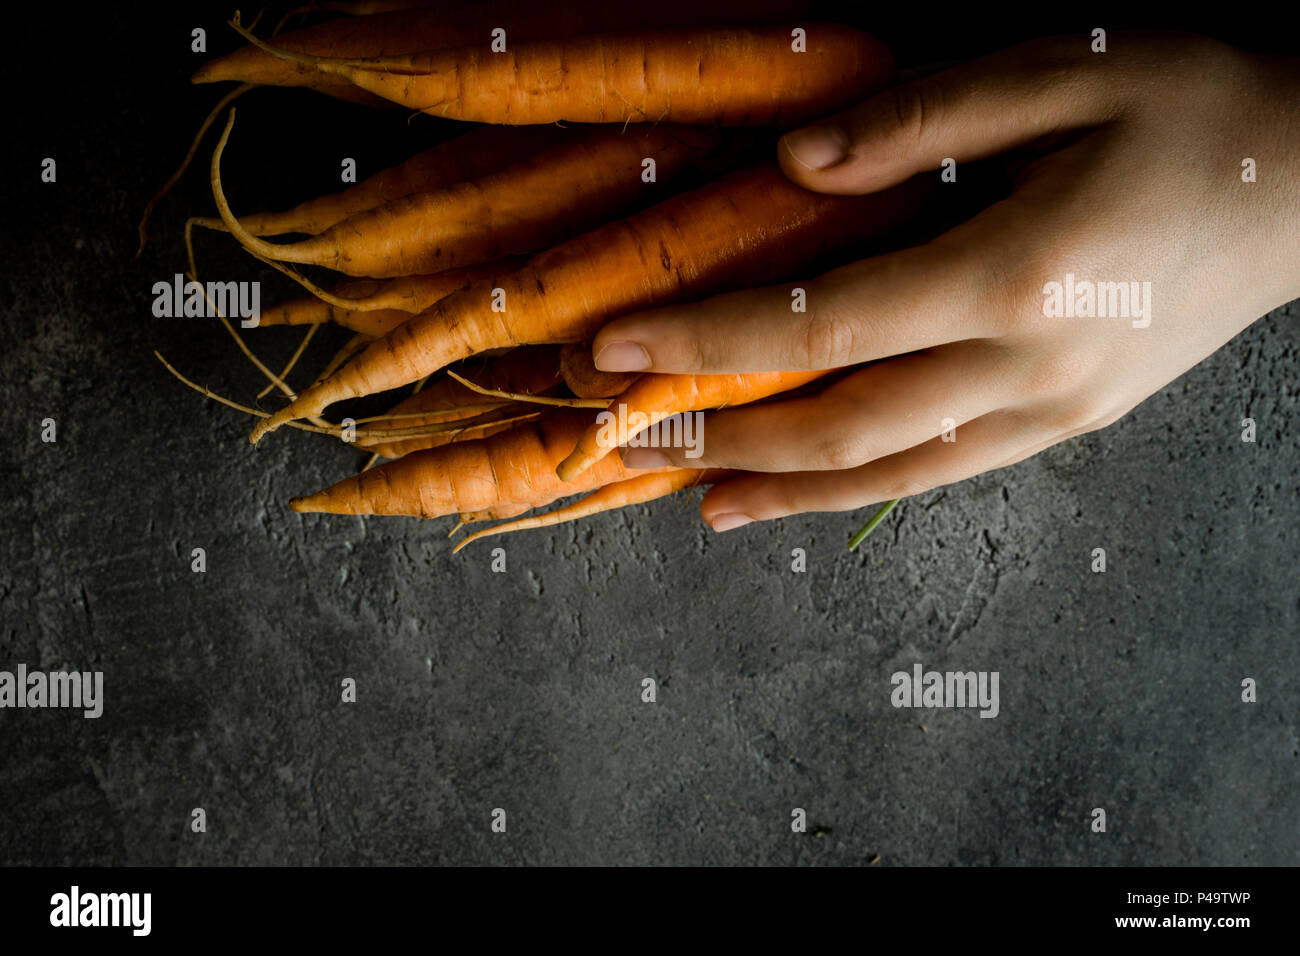 Female Hands Holding Organic Nantes Carrots. Fresh Superfood Healthy Eating Concept. Stock Photo